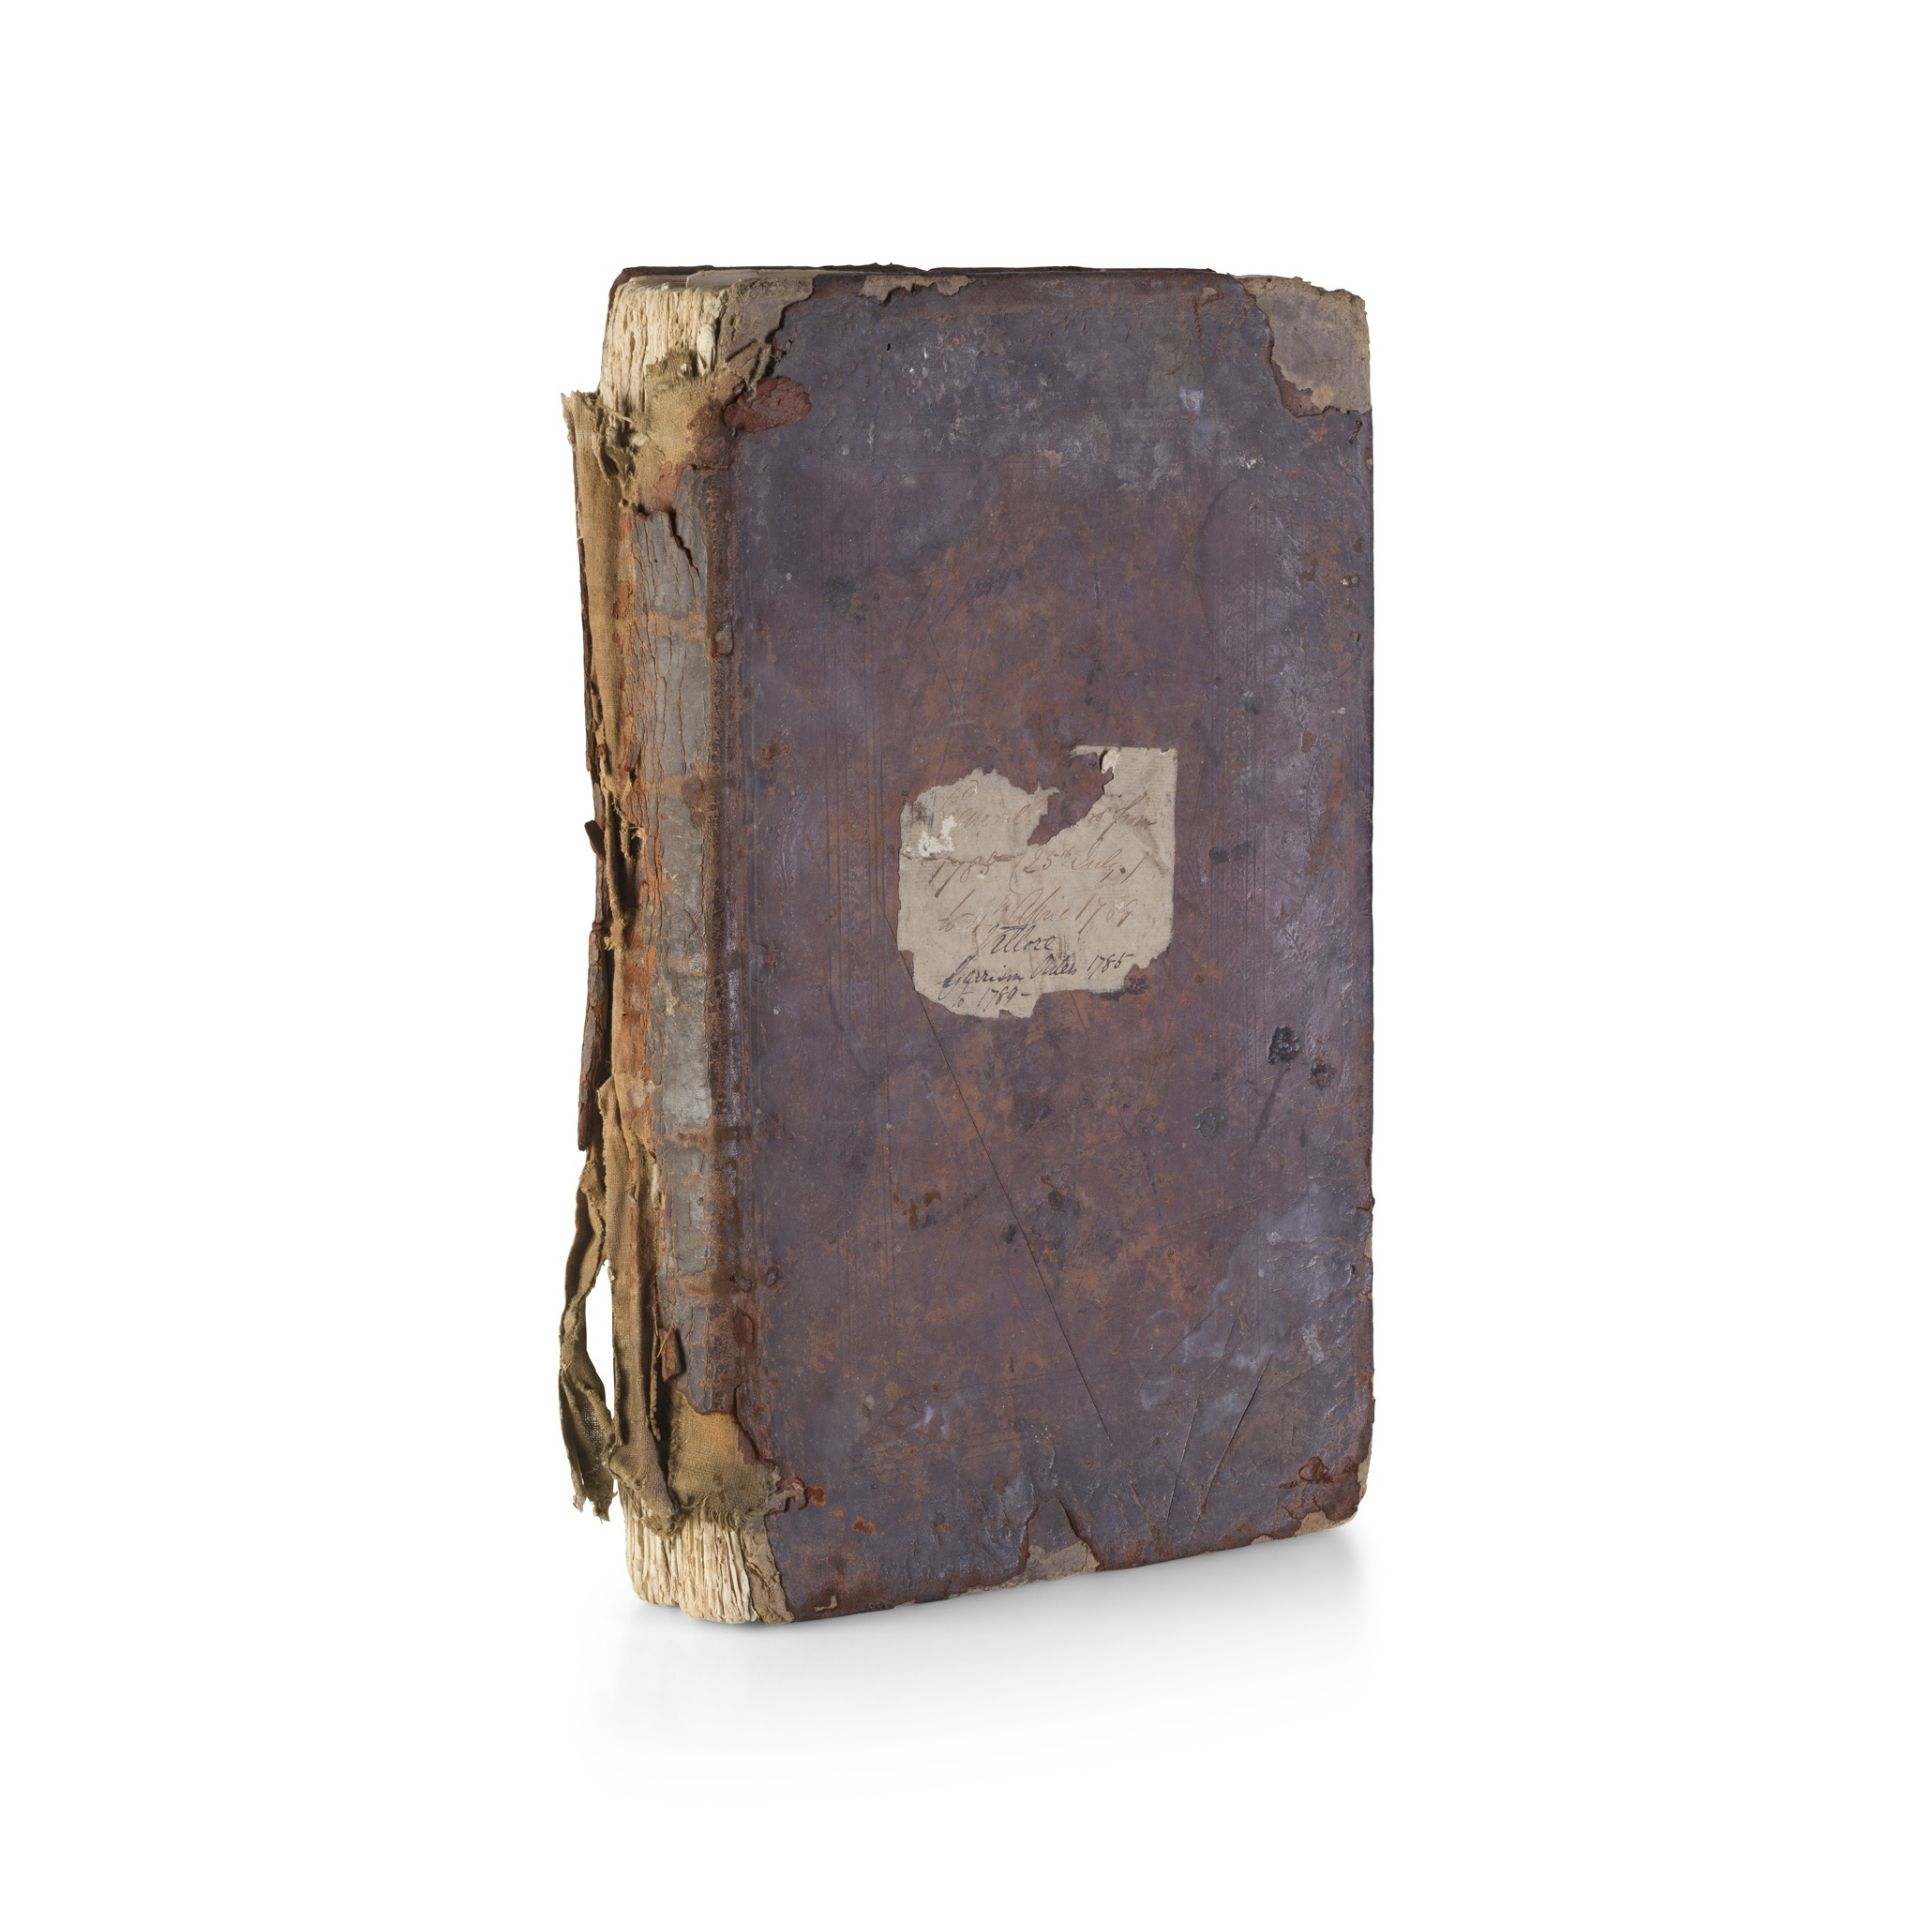 East India Company 'Vellore Garrison Orderly Book', 1785-9